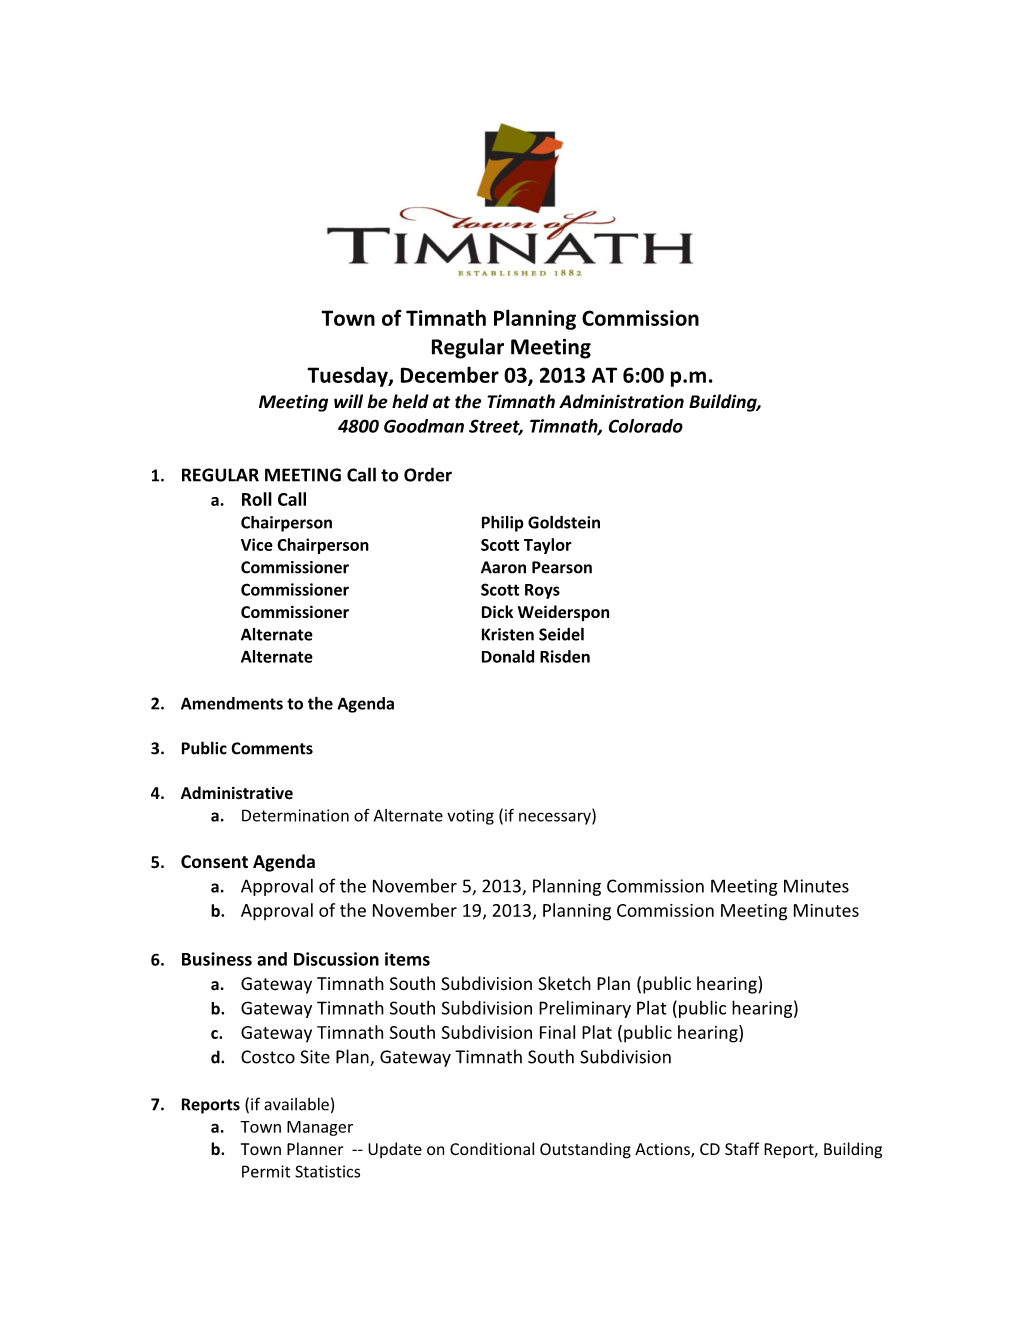 Town of Timnath Planning Commission Regular Meeting Tuesday, December 03, 2013 at 6:00 P.M